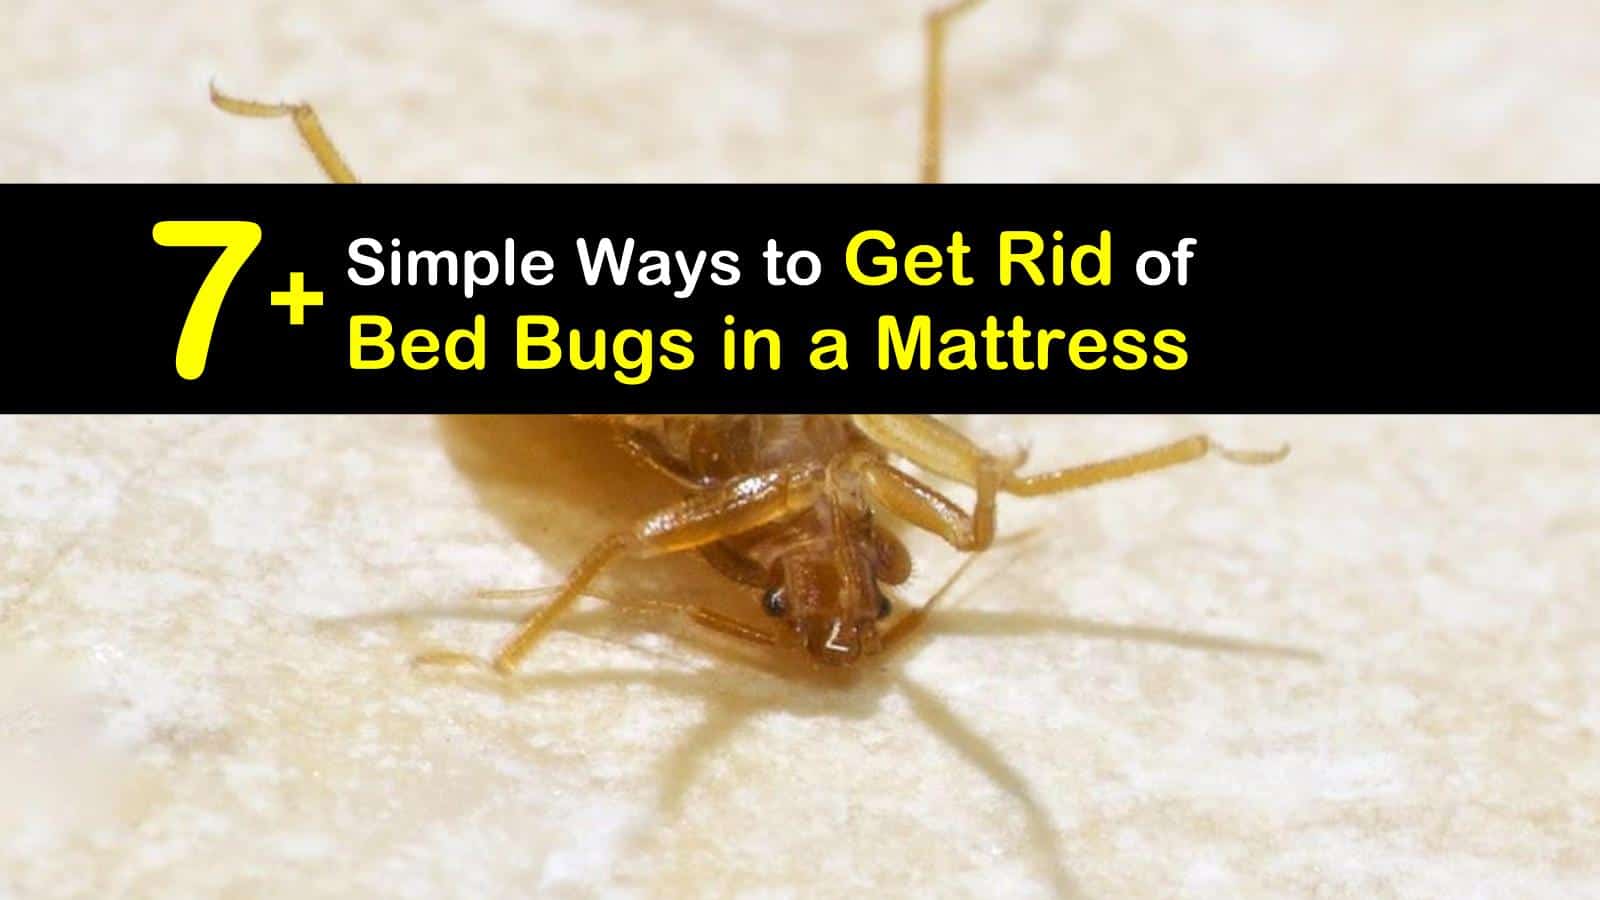 too of mattress with bed bugs